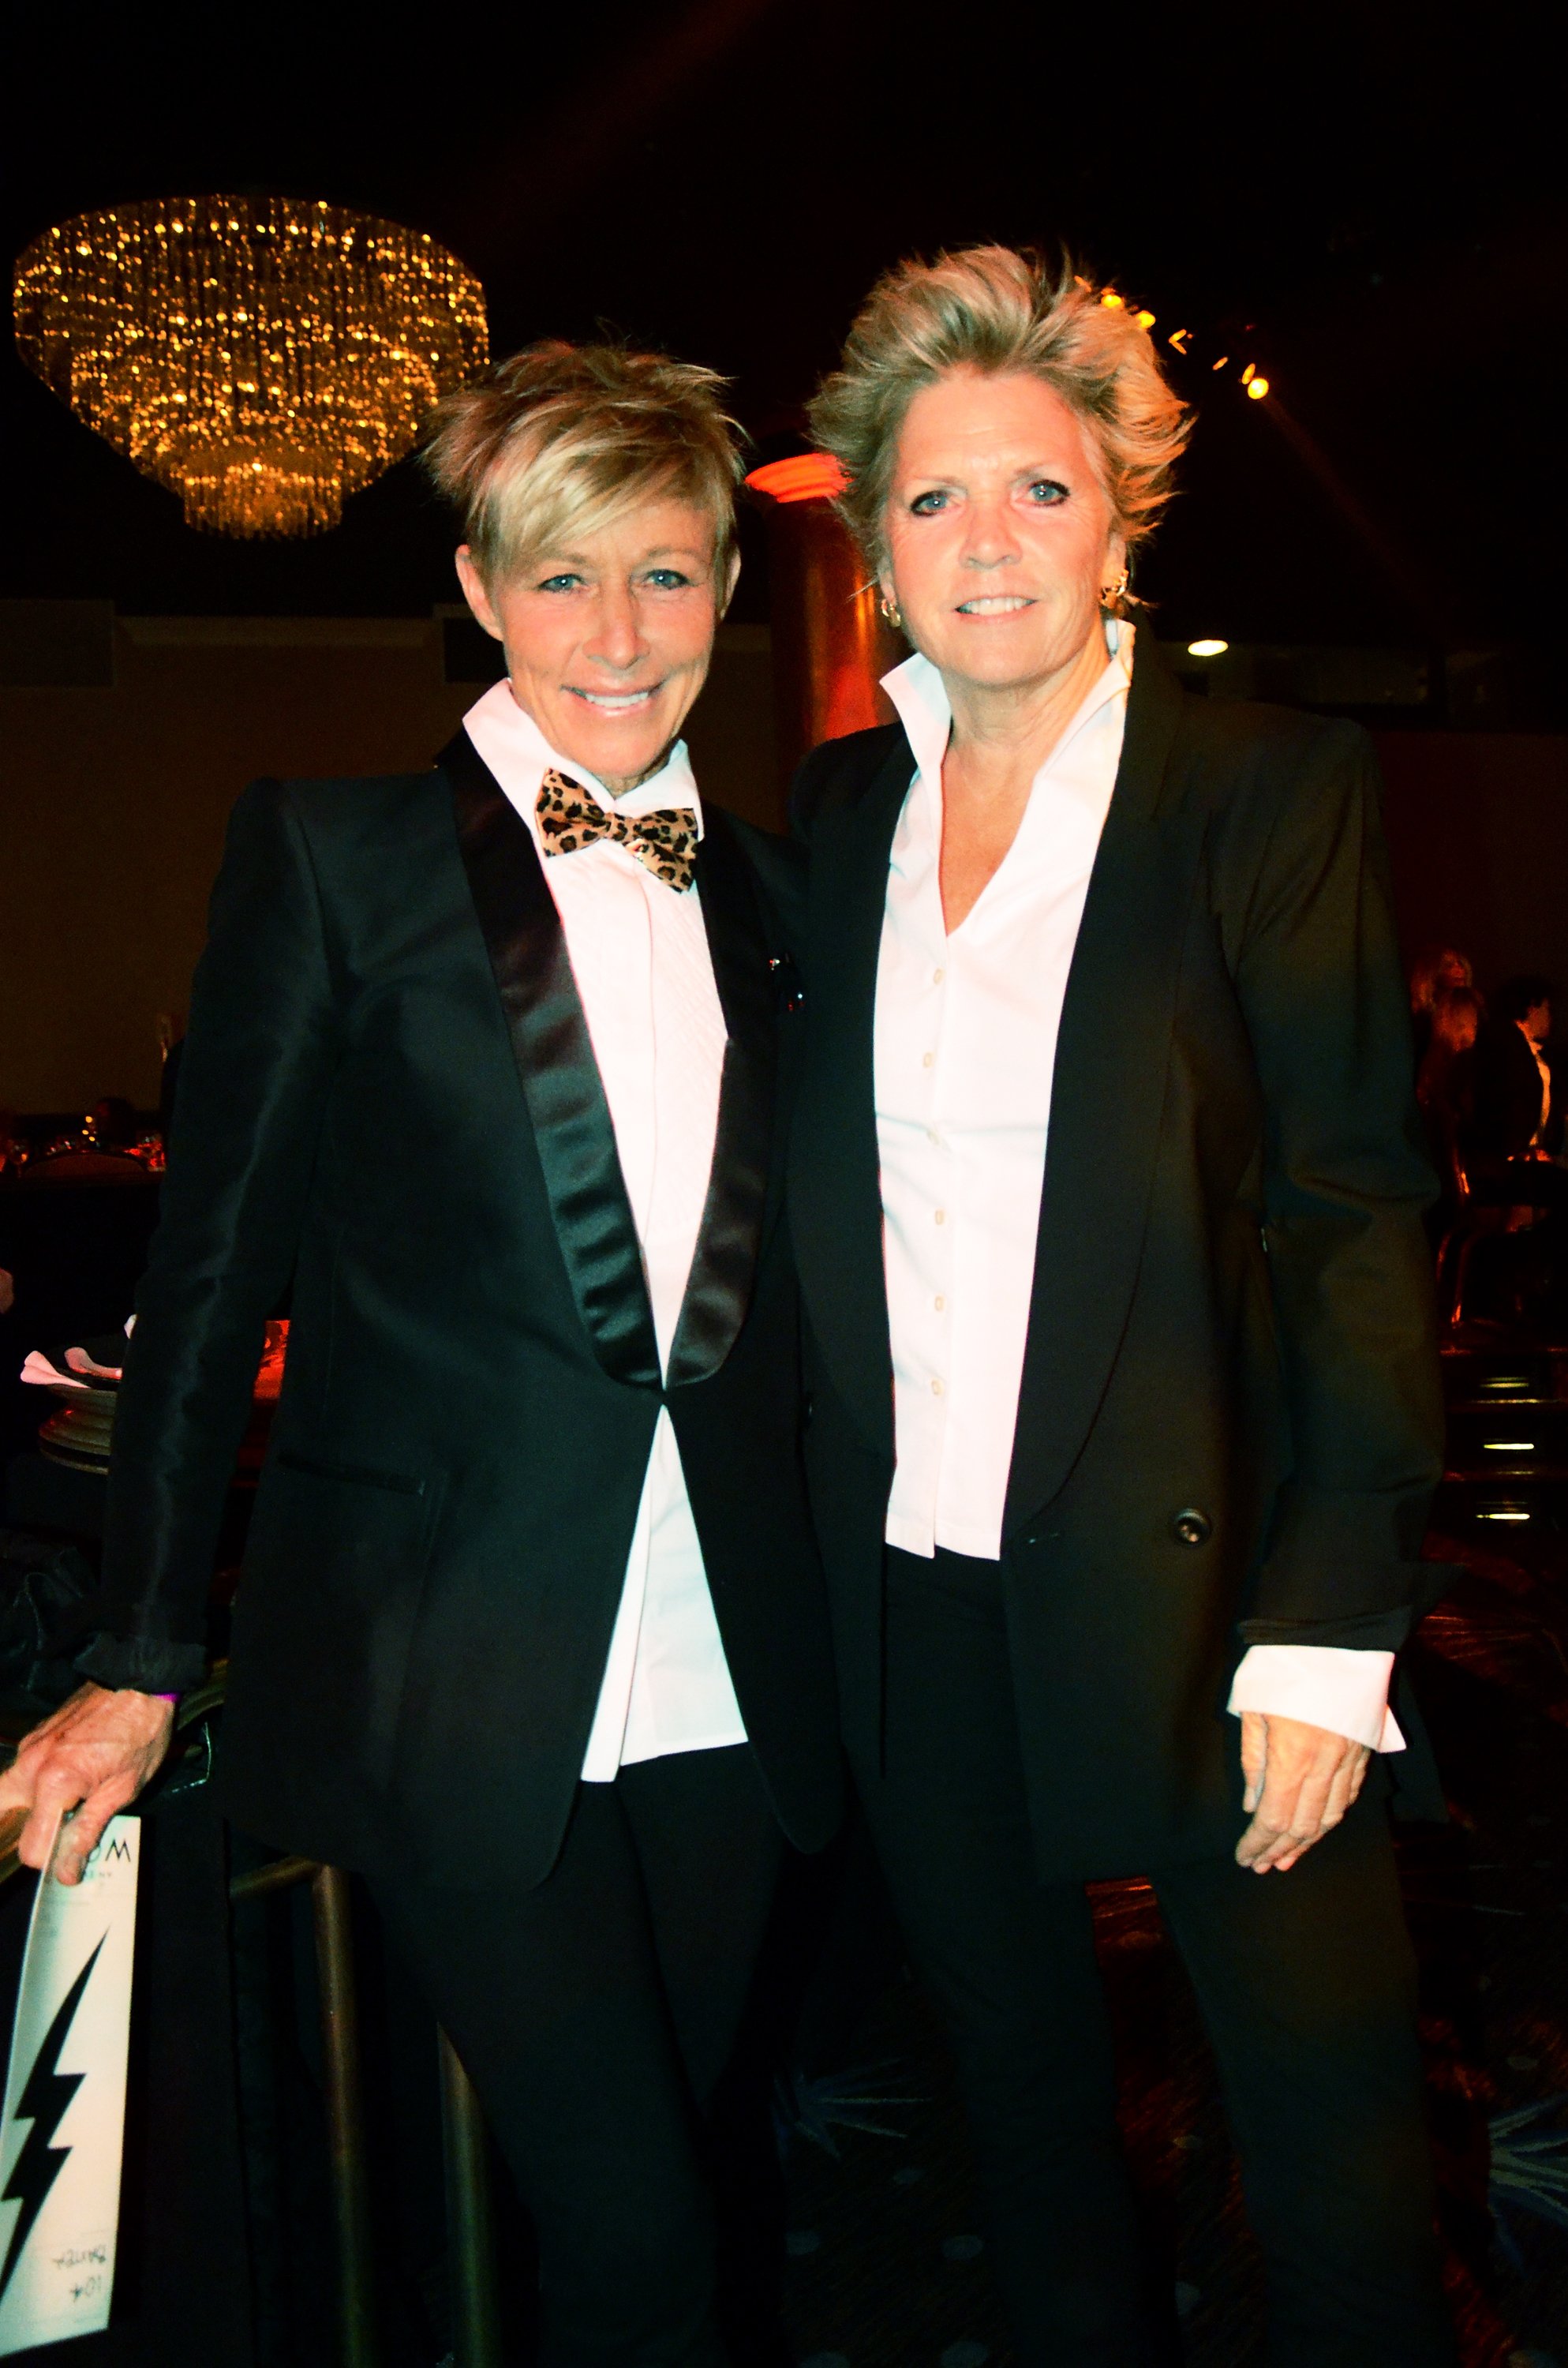 Nancy Locke and Meredith Baxter attend the L.A. Gay & Lesbian Center's 2013 "An Evening With Women" gala, Beverly Hills, California. | Photo: Getty Images